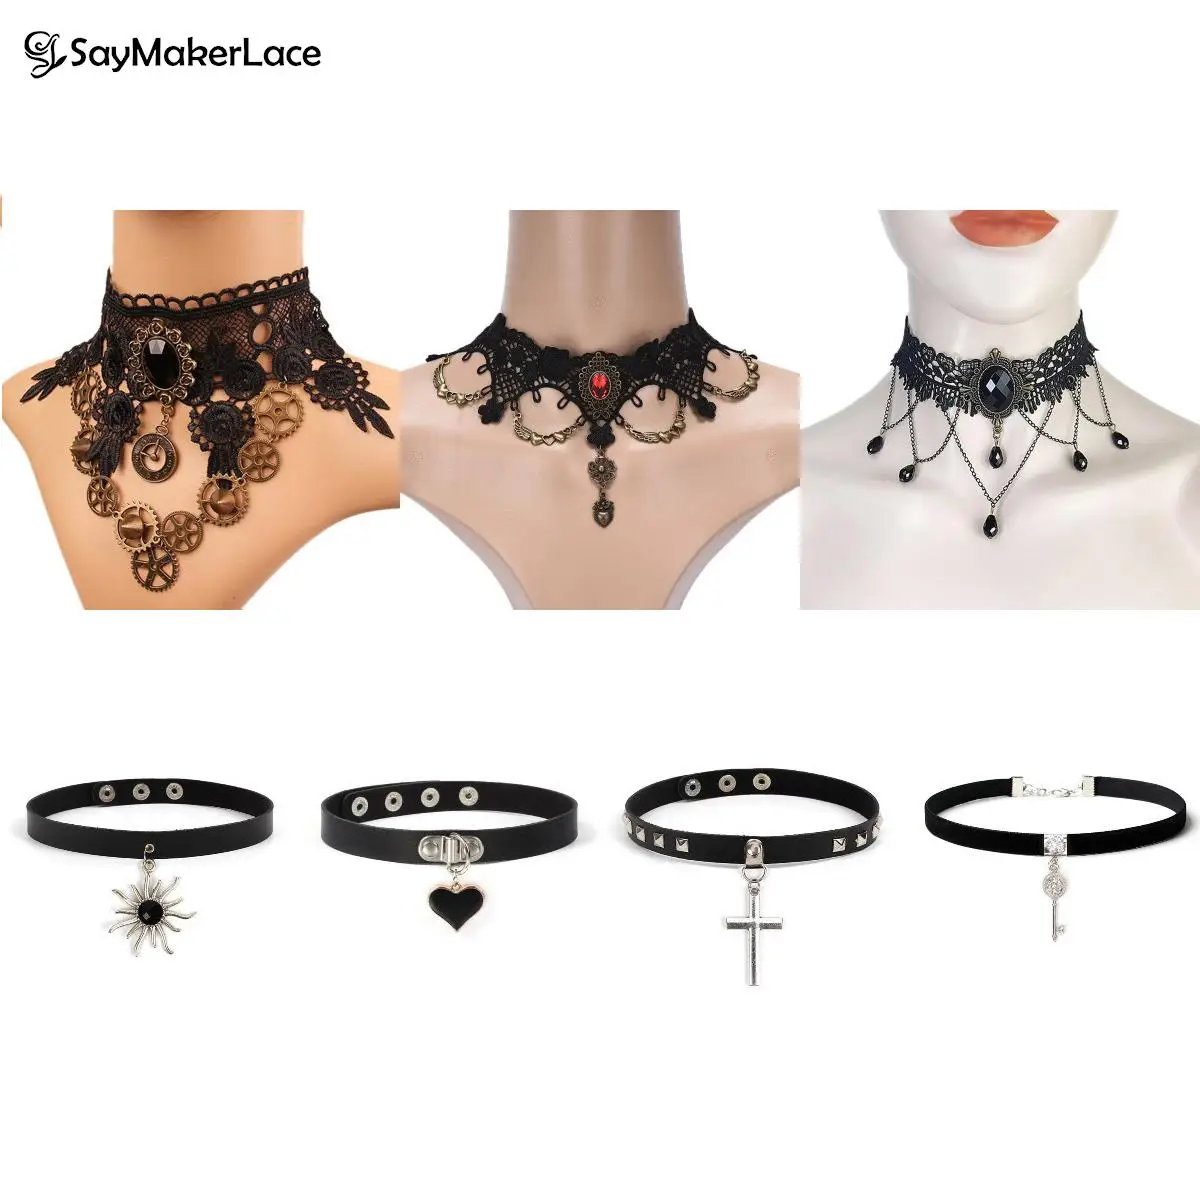 

Gothic Vintage Collares Sexy Gothic Chokers Crystal gear chain Black Lace Neck Choker Necklace Women Chocker Steampunk Jewelry